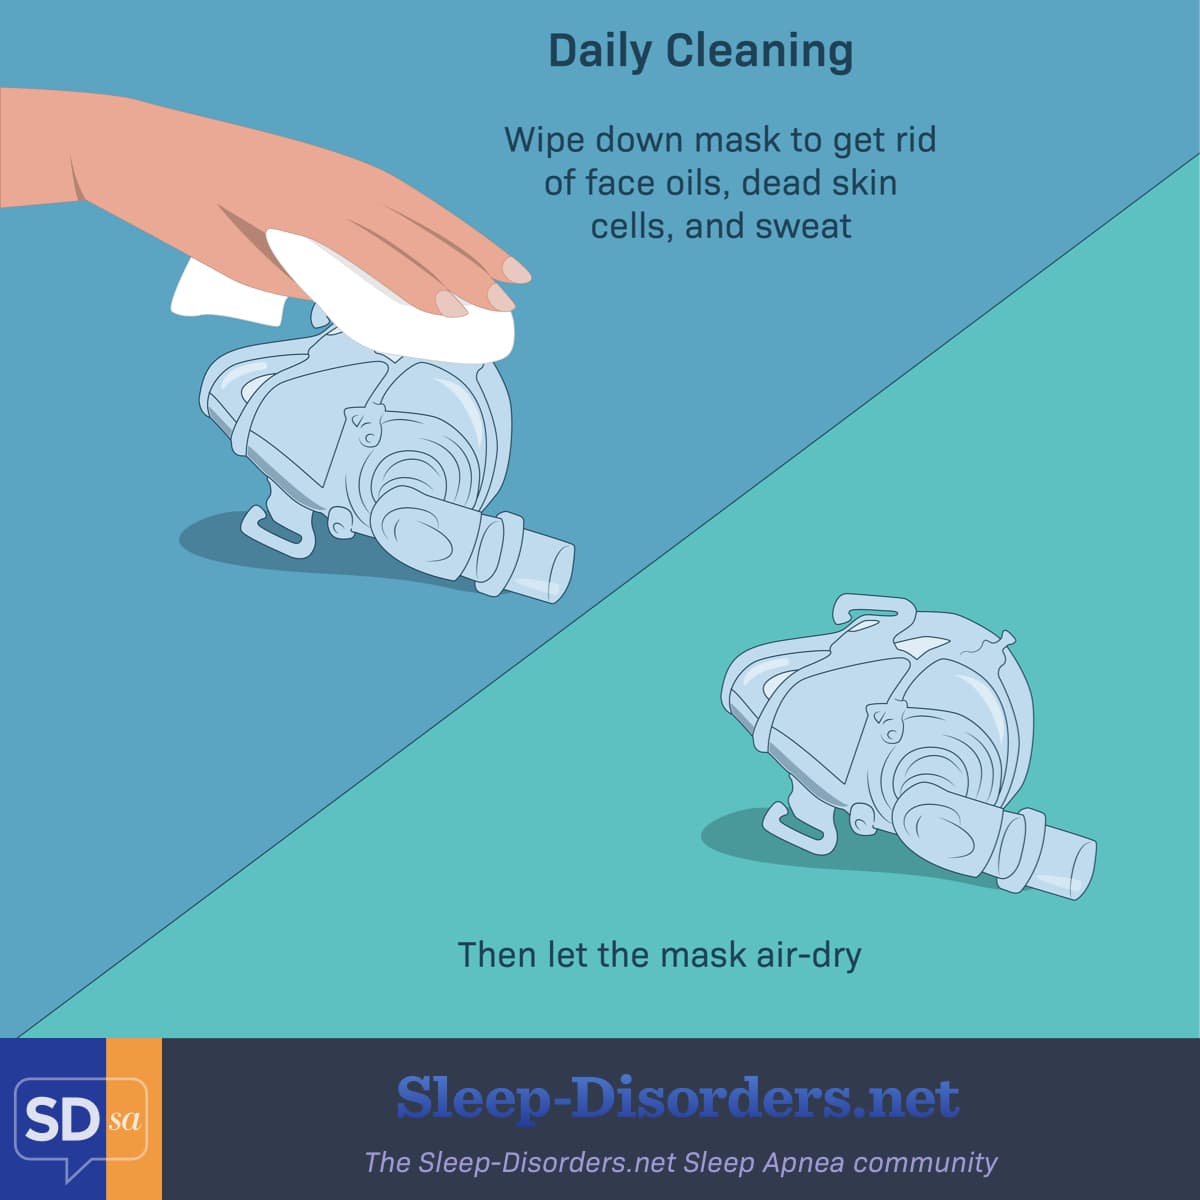 Daily, wipe down CPAP mask and allow it to air dry